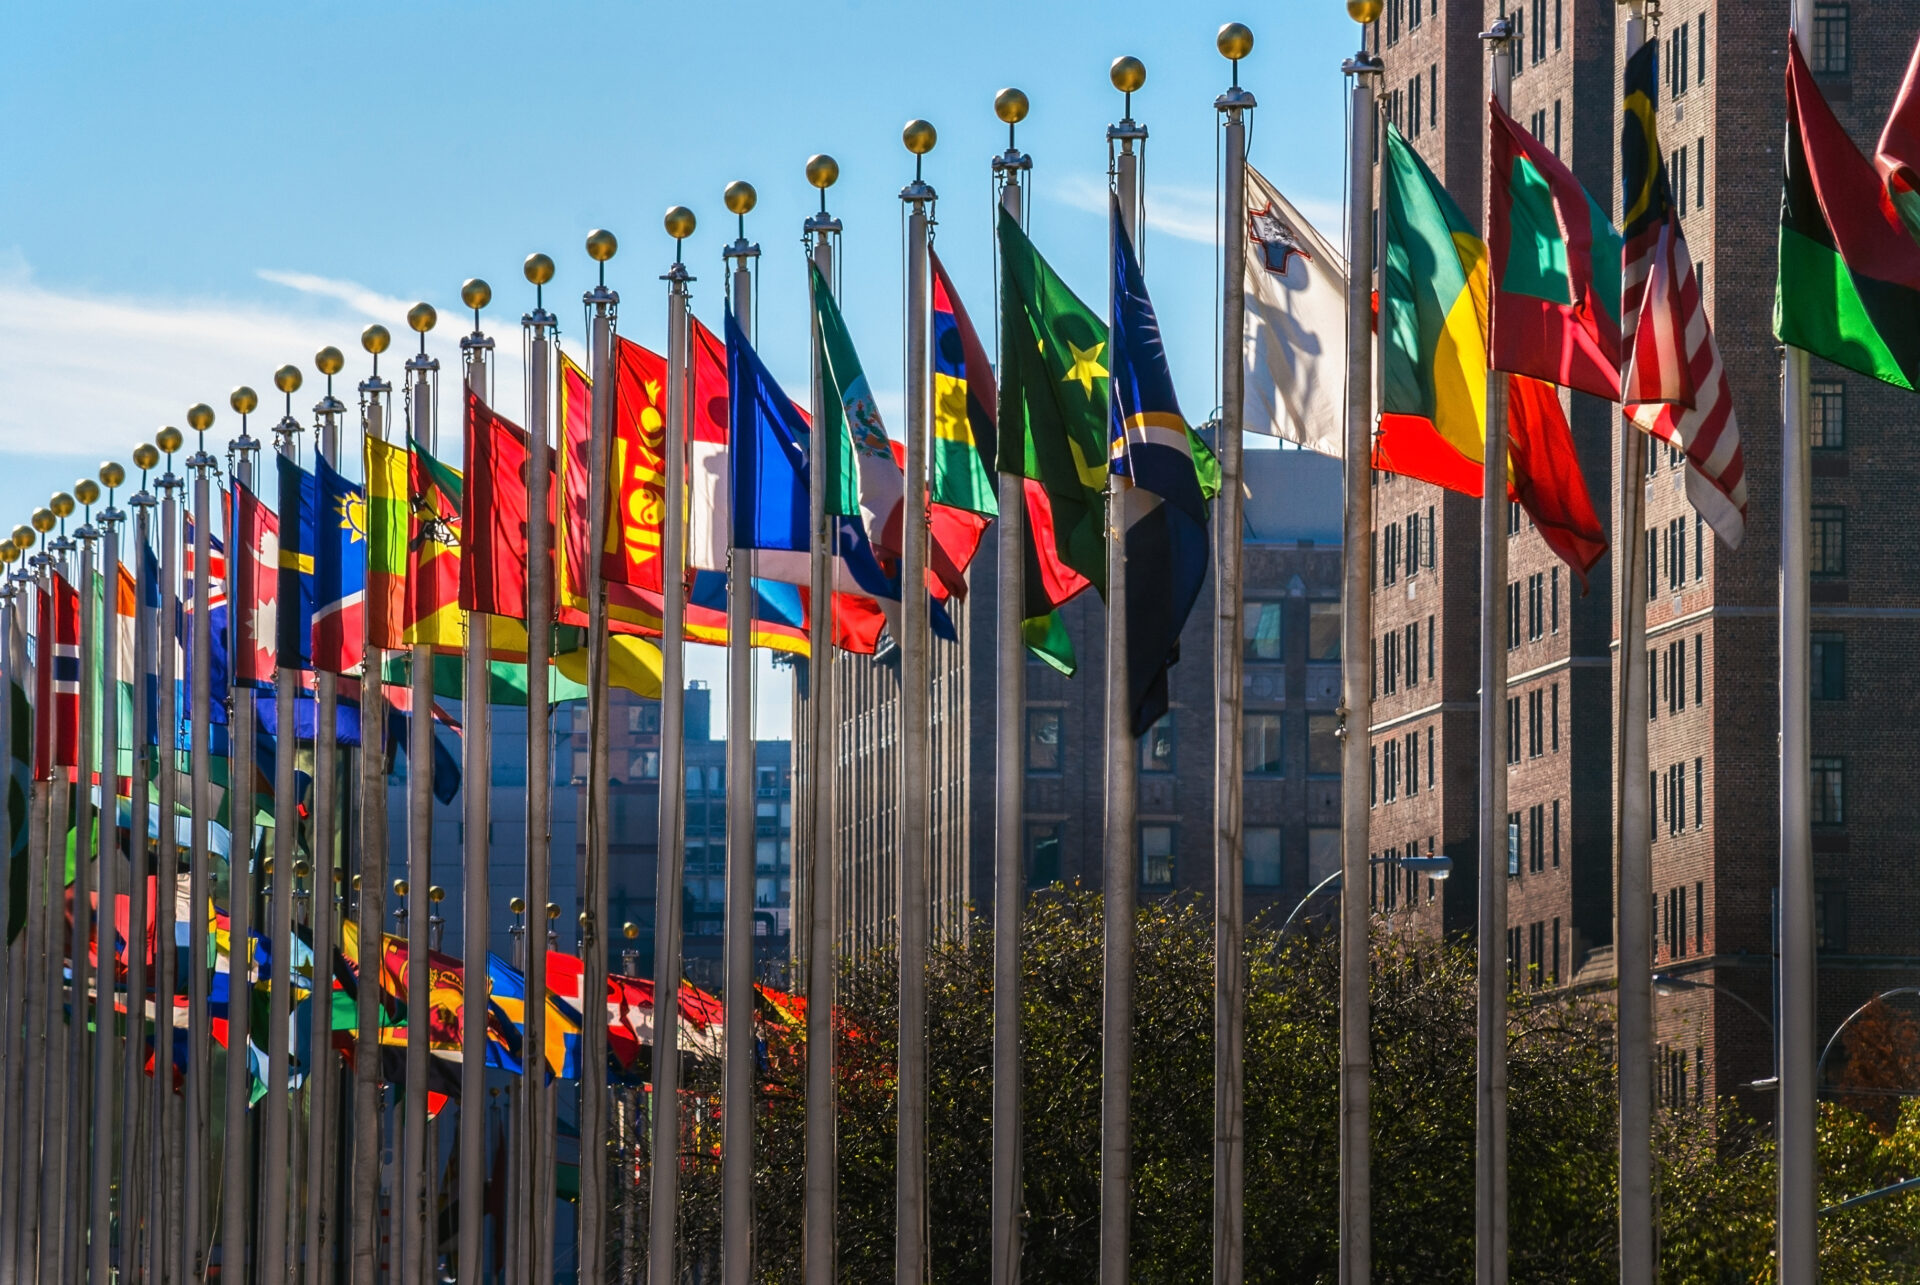 Flags from all countries outside of the UN building in Manhattan.